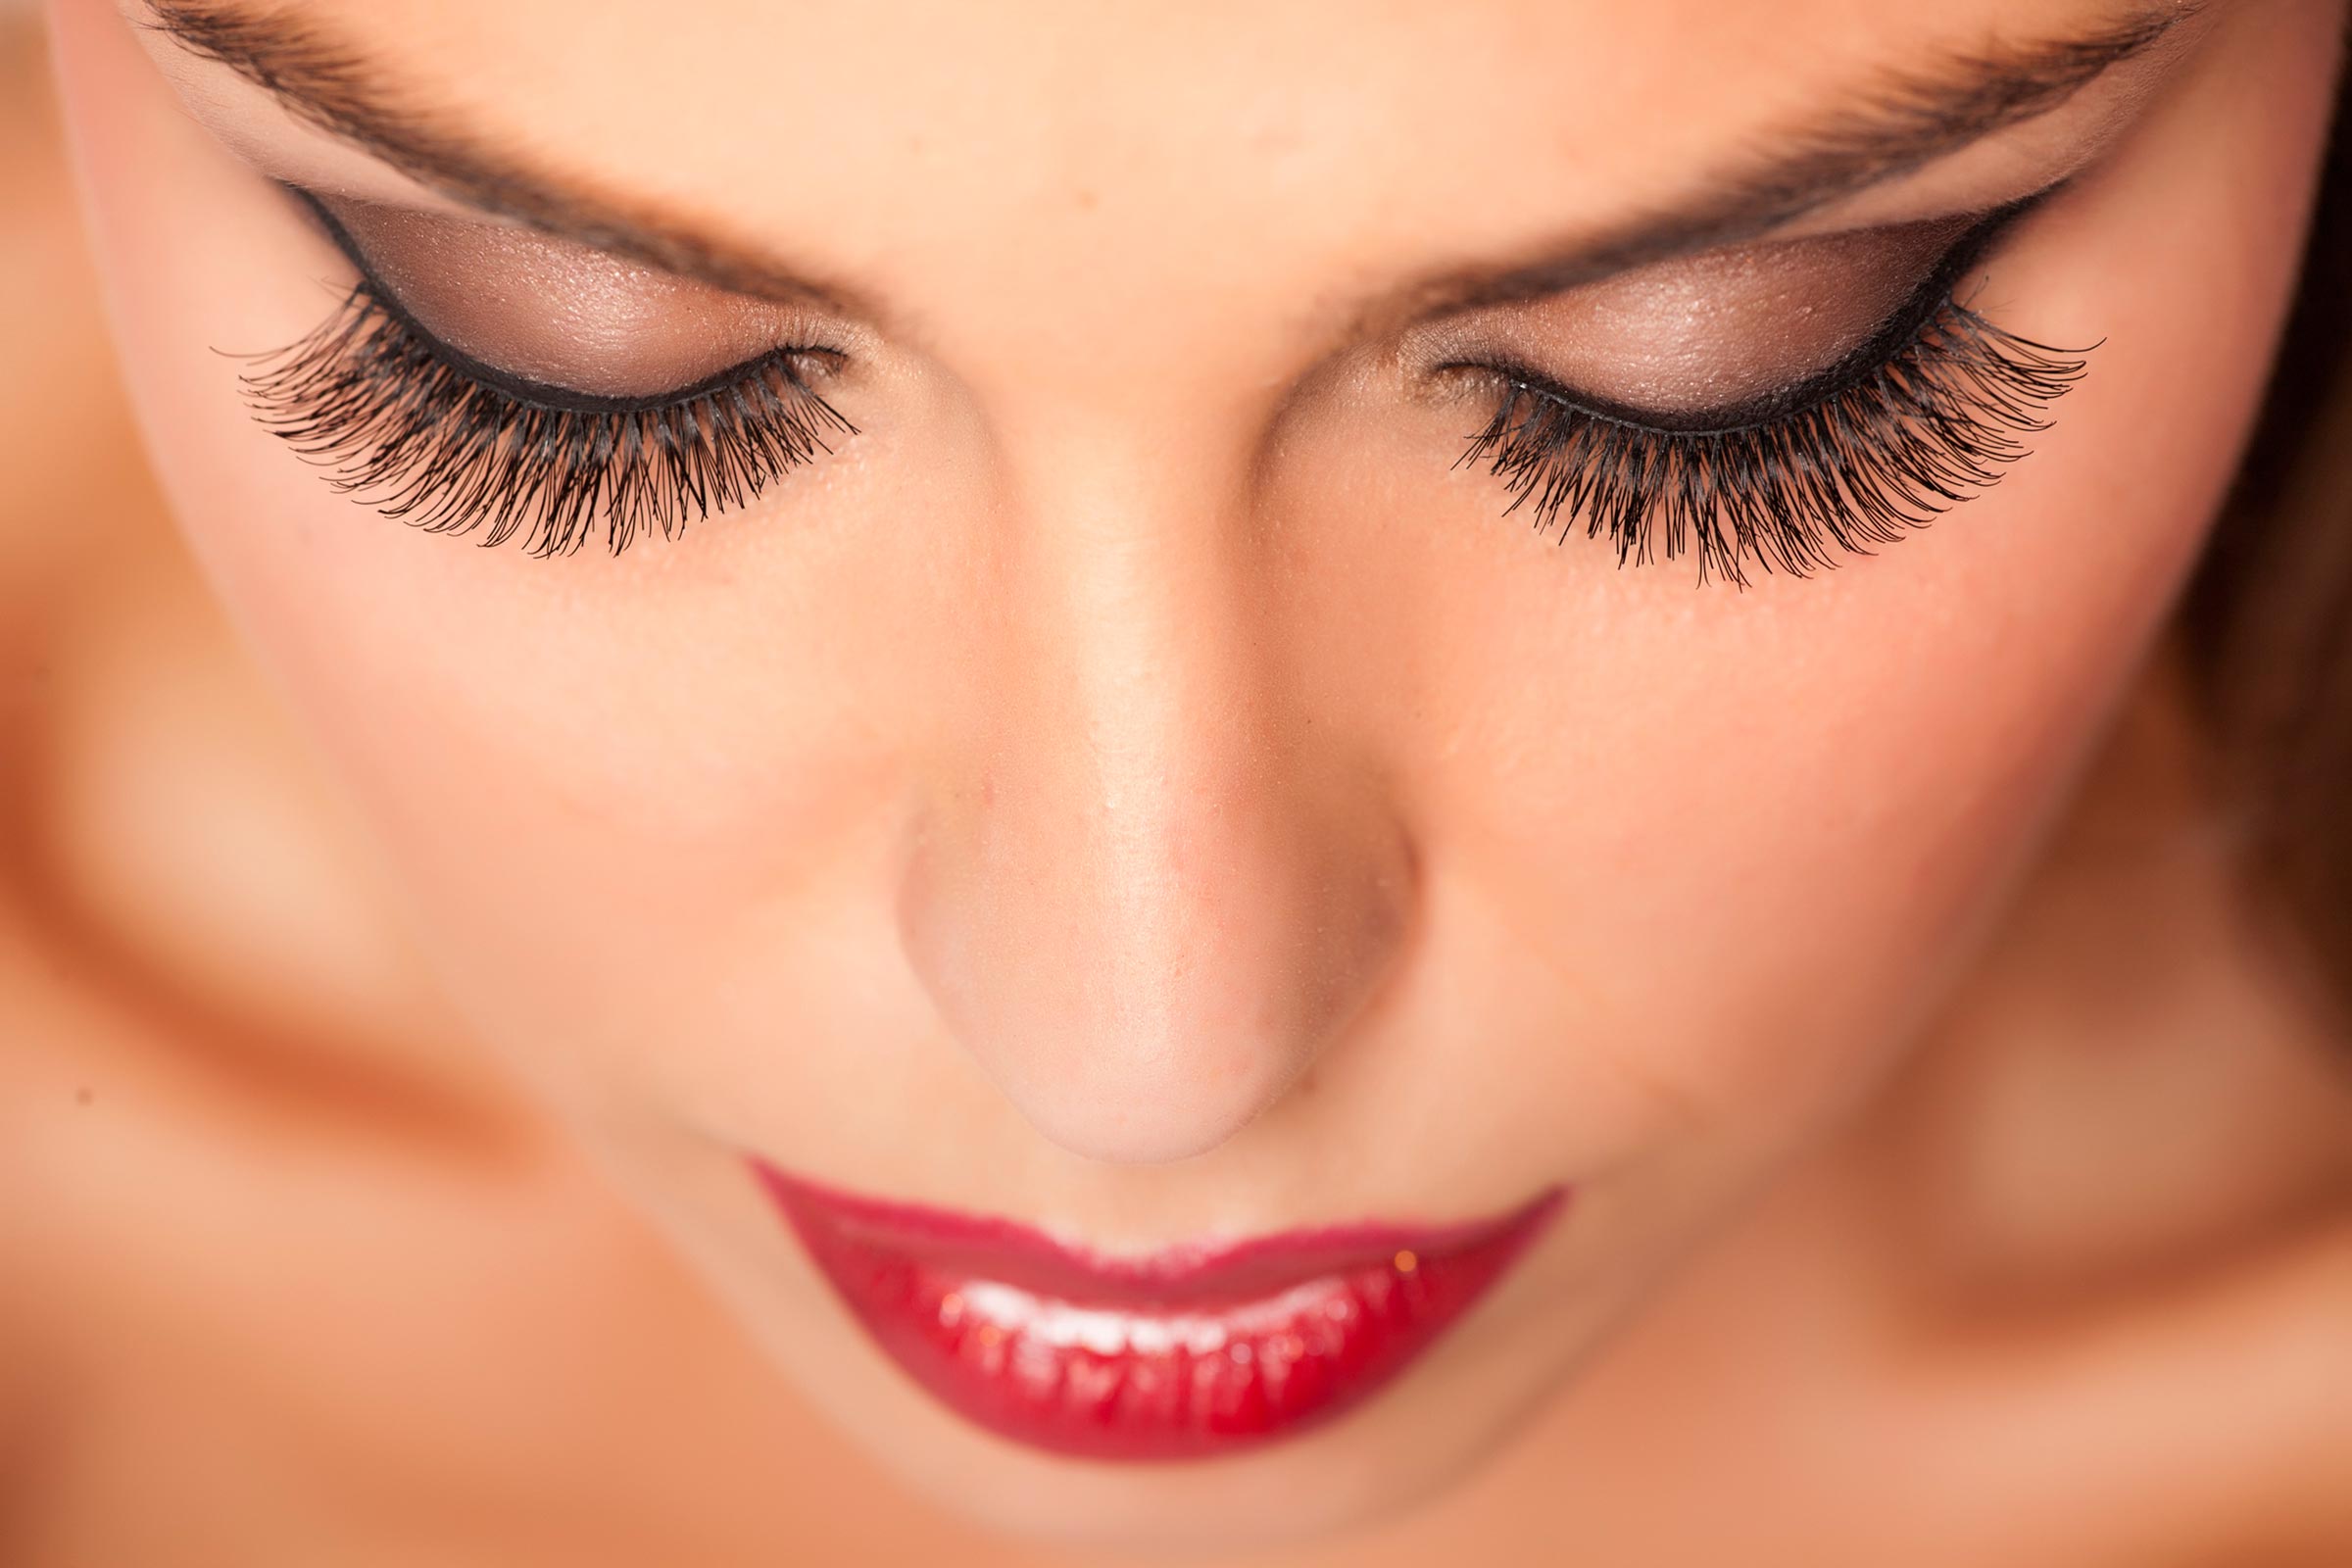 Eyelash Extensions Myths You Should Know